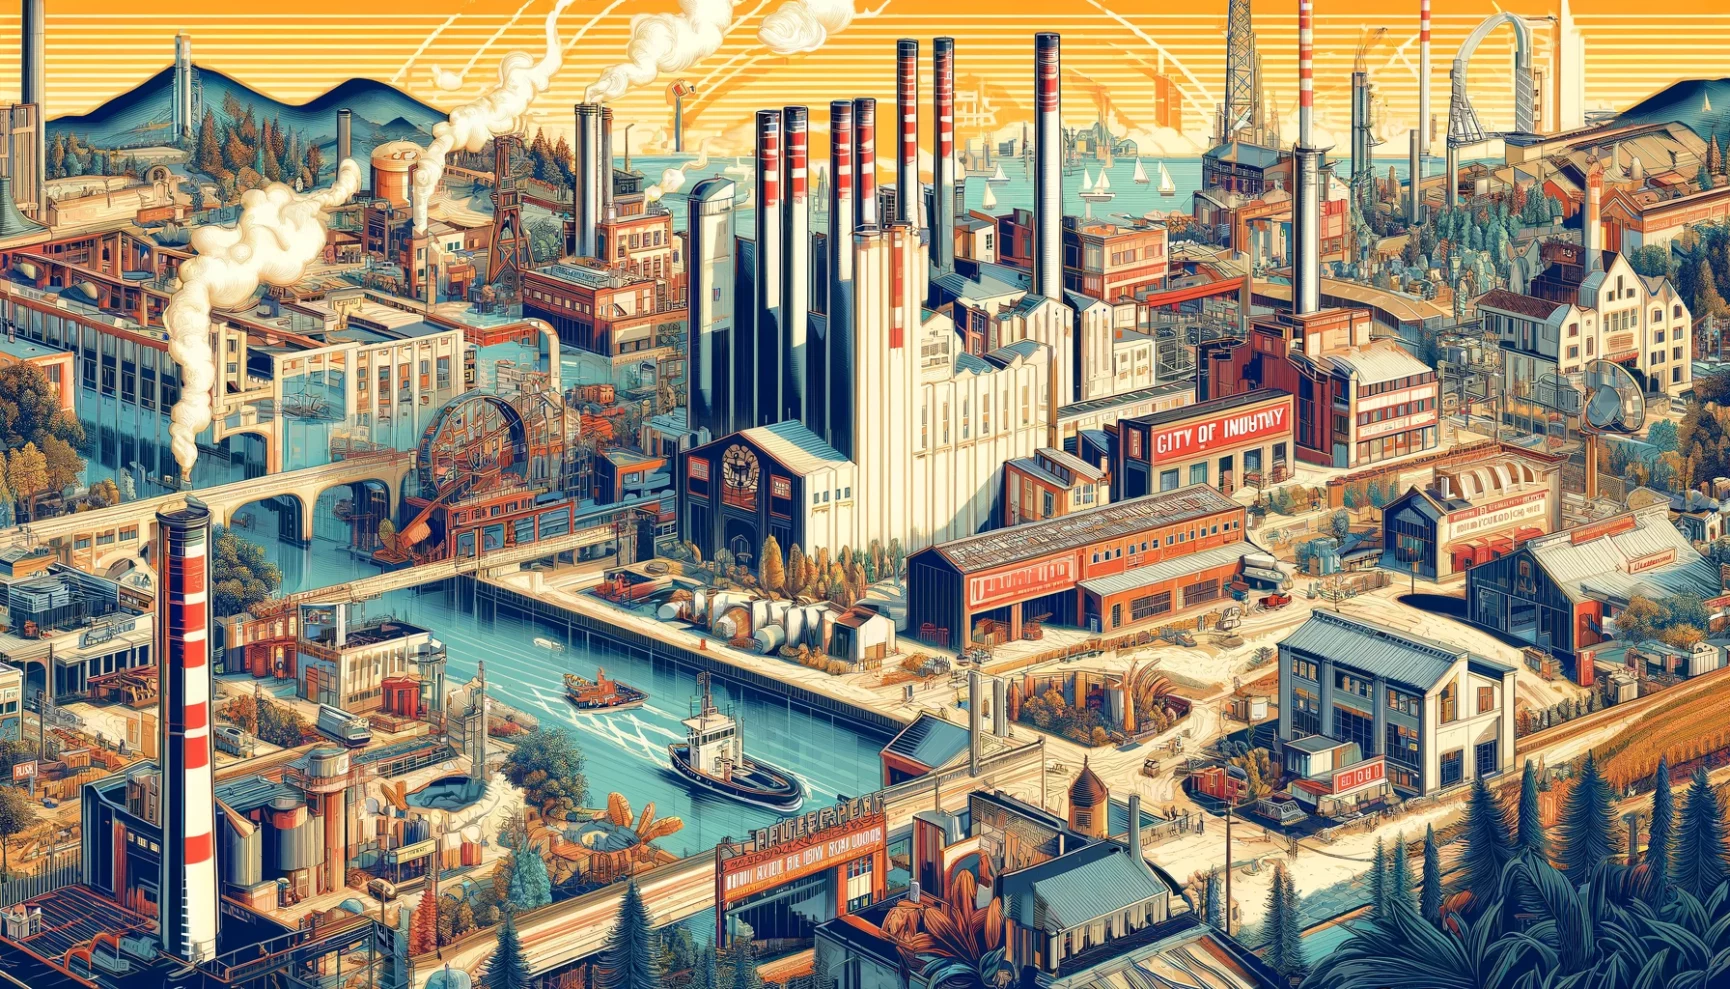 Illustrated industrial landscape with factories, smokestacks, and a waterway.